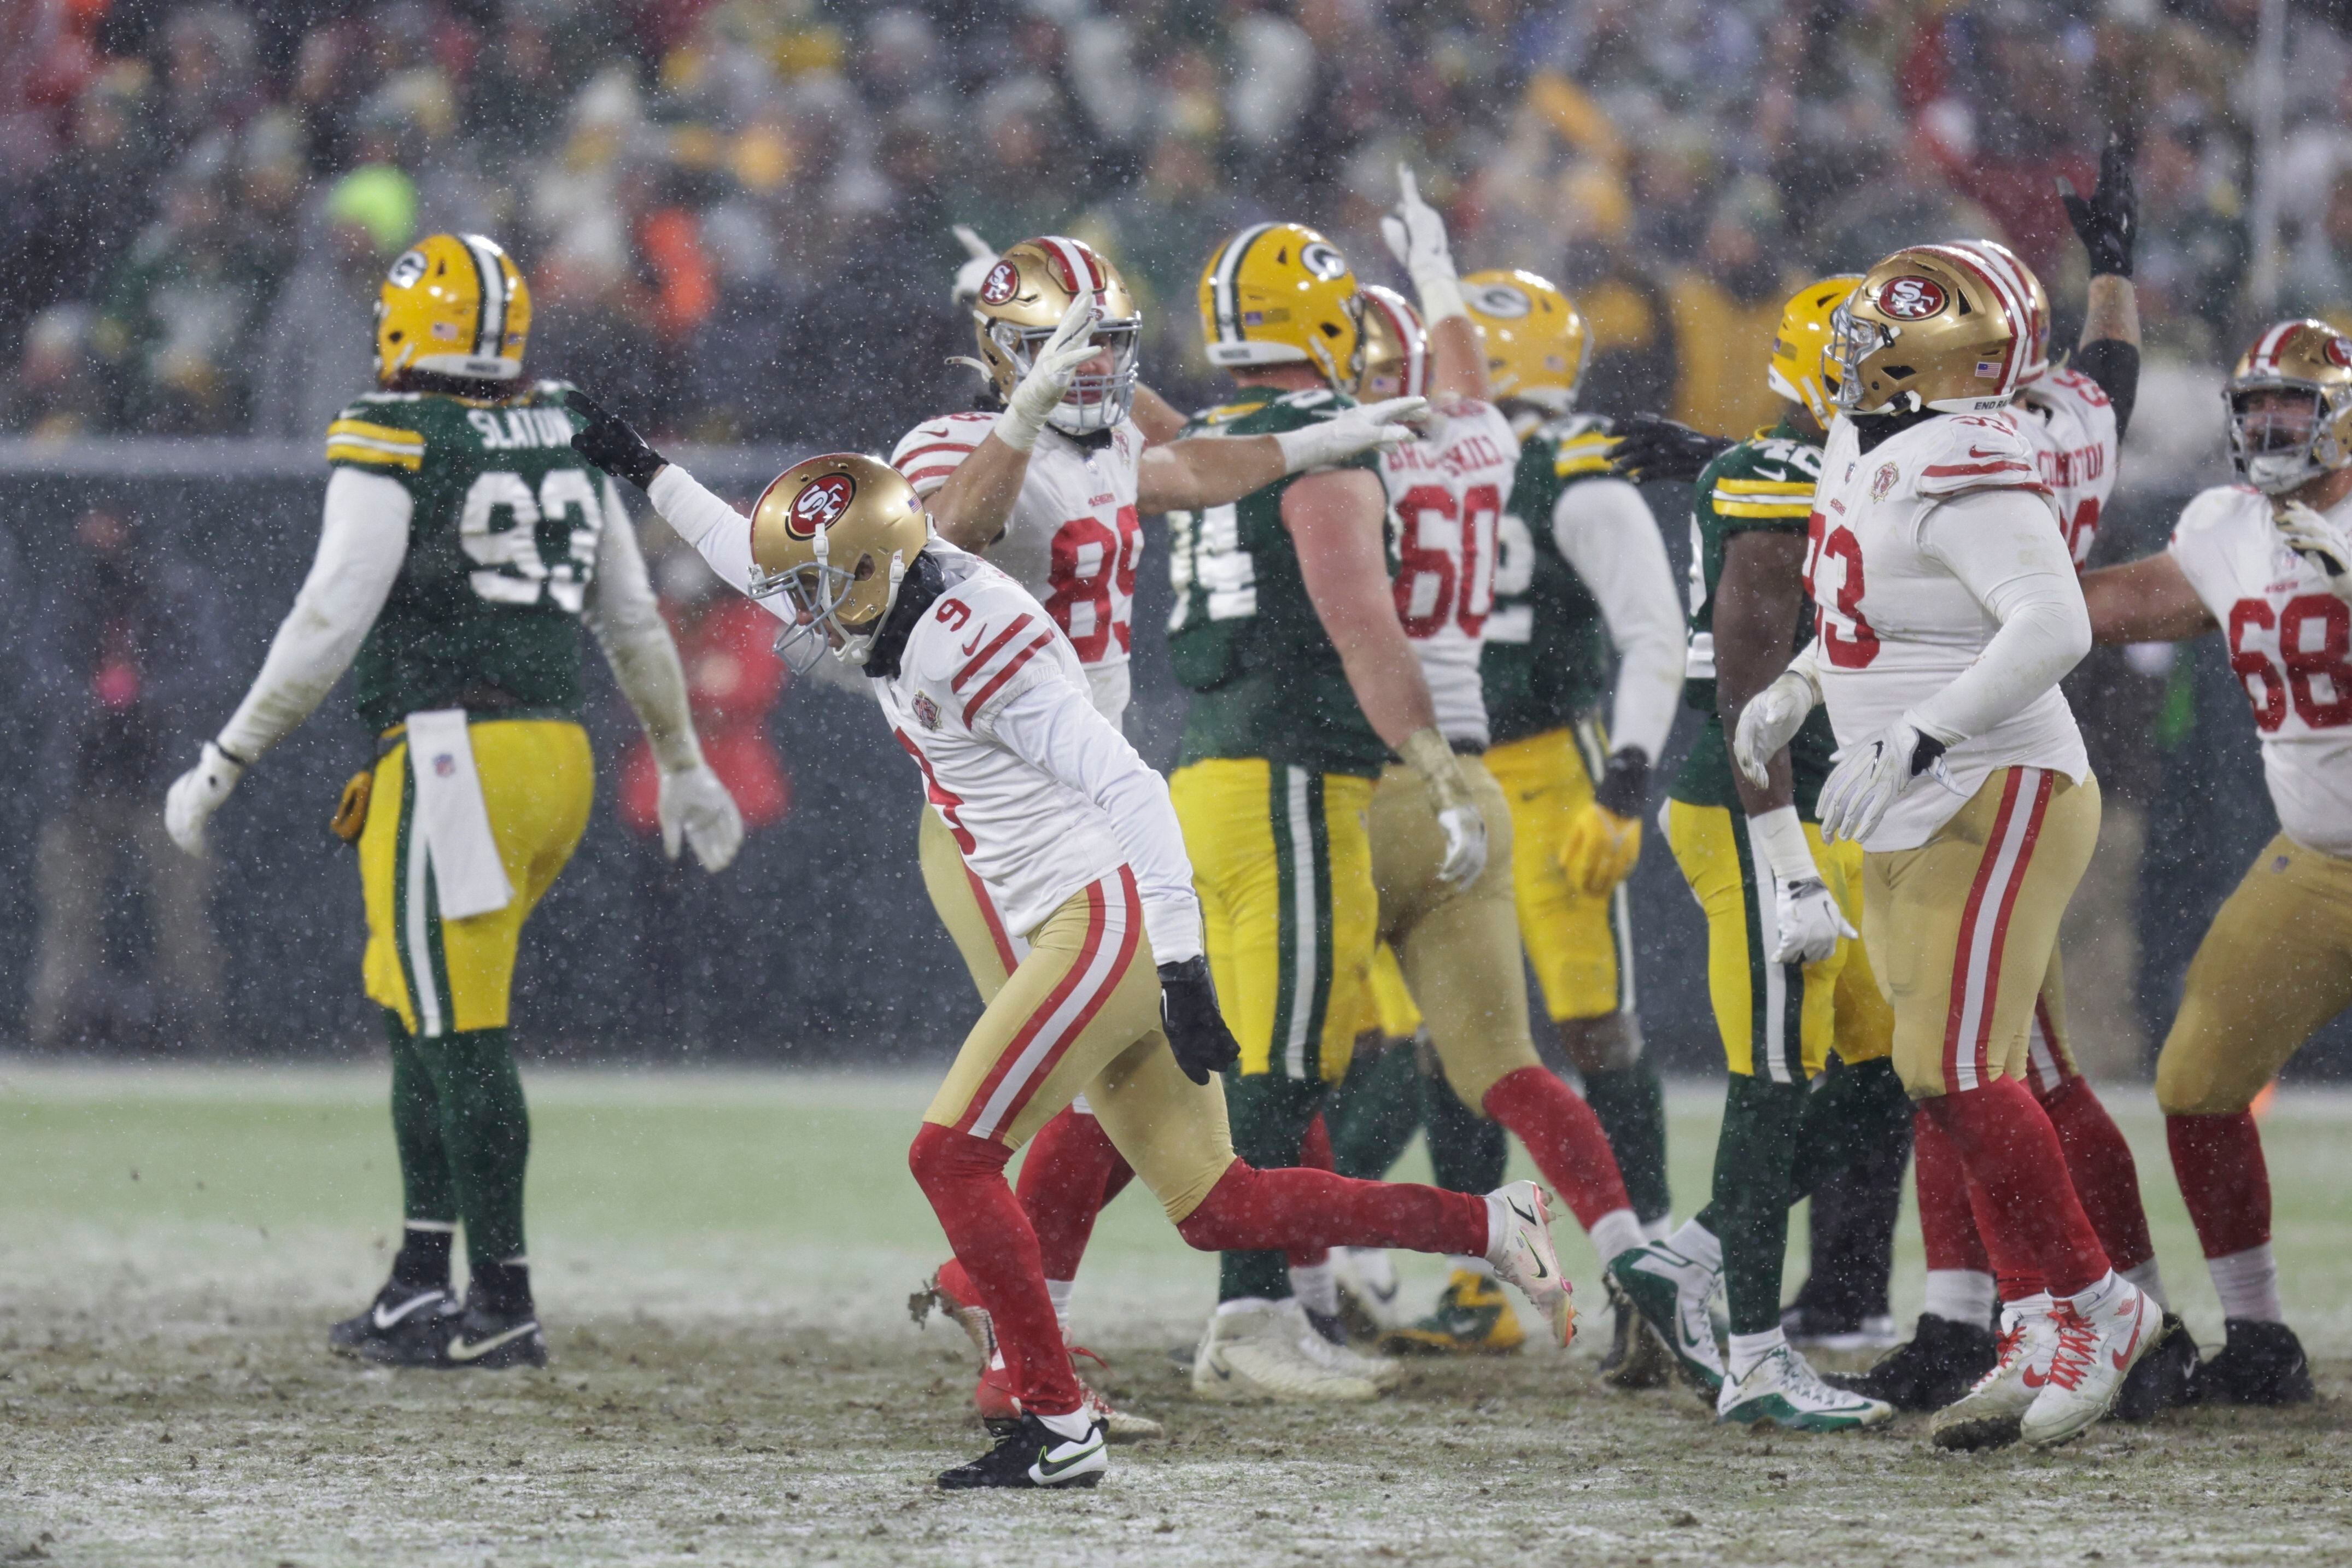 Packers win thriller over 49ers on walk-off field goal, 30-28